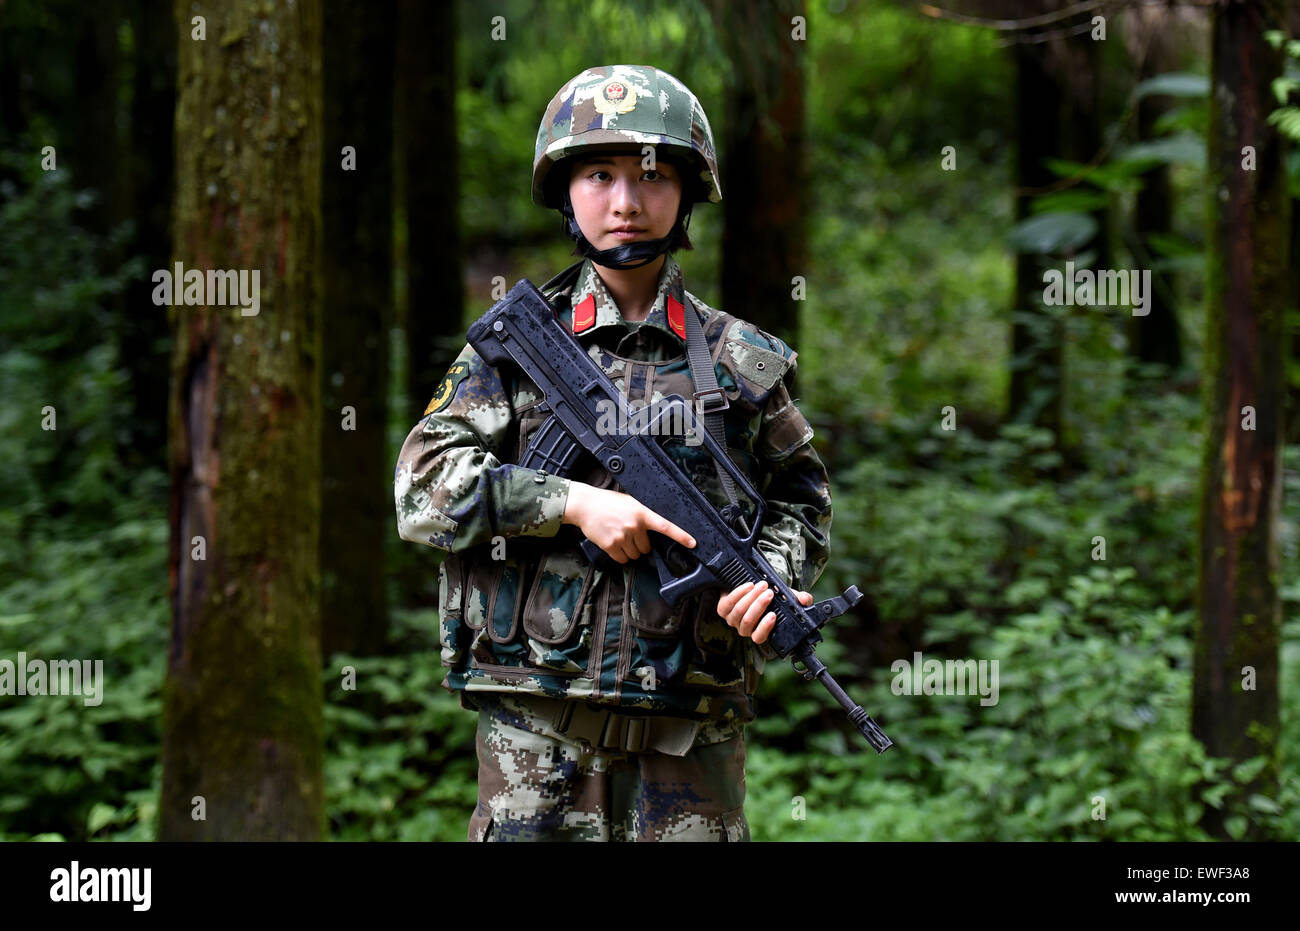 (150625) -- DEHONG, June 25, 2015 (Xinhua) -- Zhang Liu takes part in a drilling in the jungle at the border area near Myanmar in Dehong Dai-Jingpo Autonomous Prefecture, southwest China's Yunnan Province, June 24, 2015. Born in 1995, Zhang Liu became an anti-drug soldier in border checkpoint of Mukang in 2013.  Grown up in an affluent family in central China's Hunan Province, Zhang said that being a soldier had always been her dream, which drove her to join the army after graduating from high school. Being a front line anti-drug force, the border checkpoint of Mukang has captured about 100 ki Stock Photo